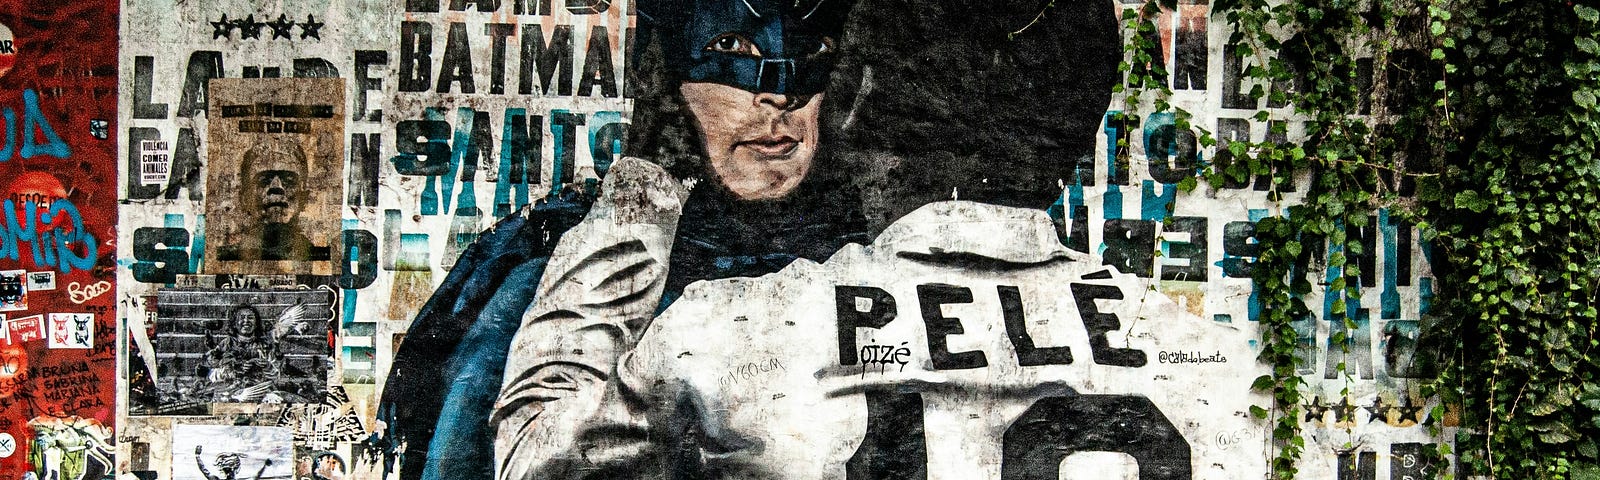 Mural of Batman and Pele about to make out.